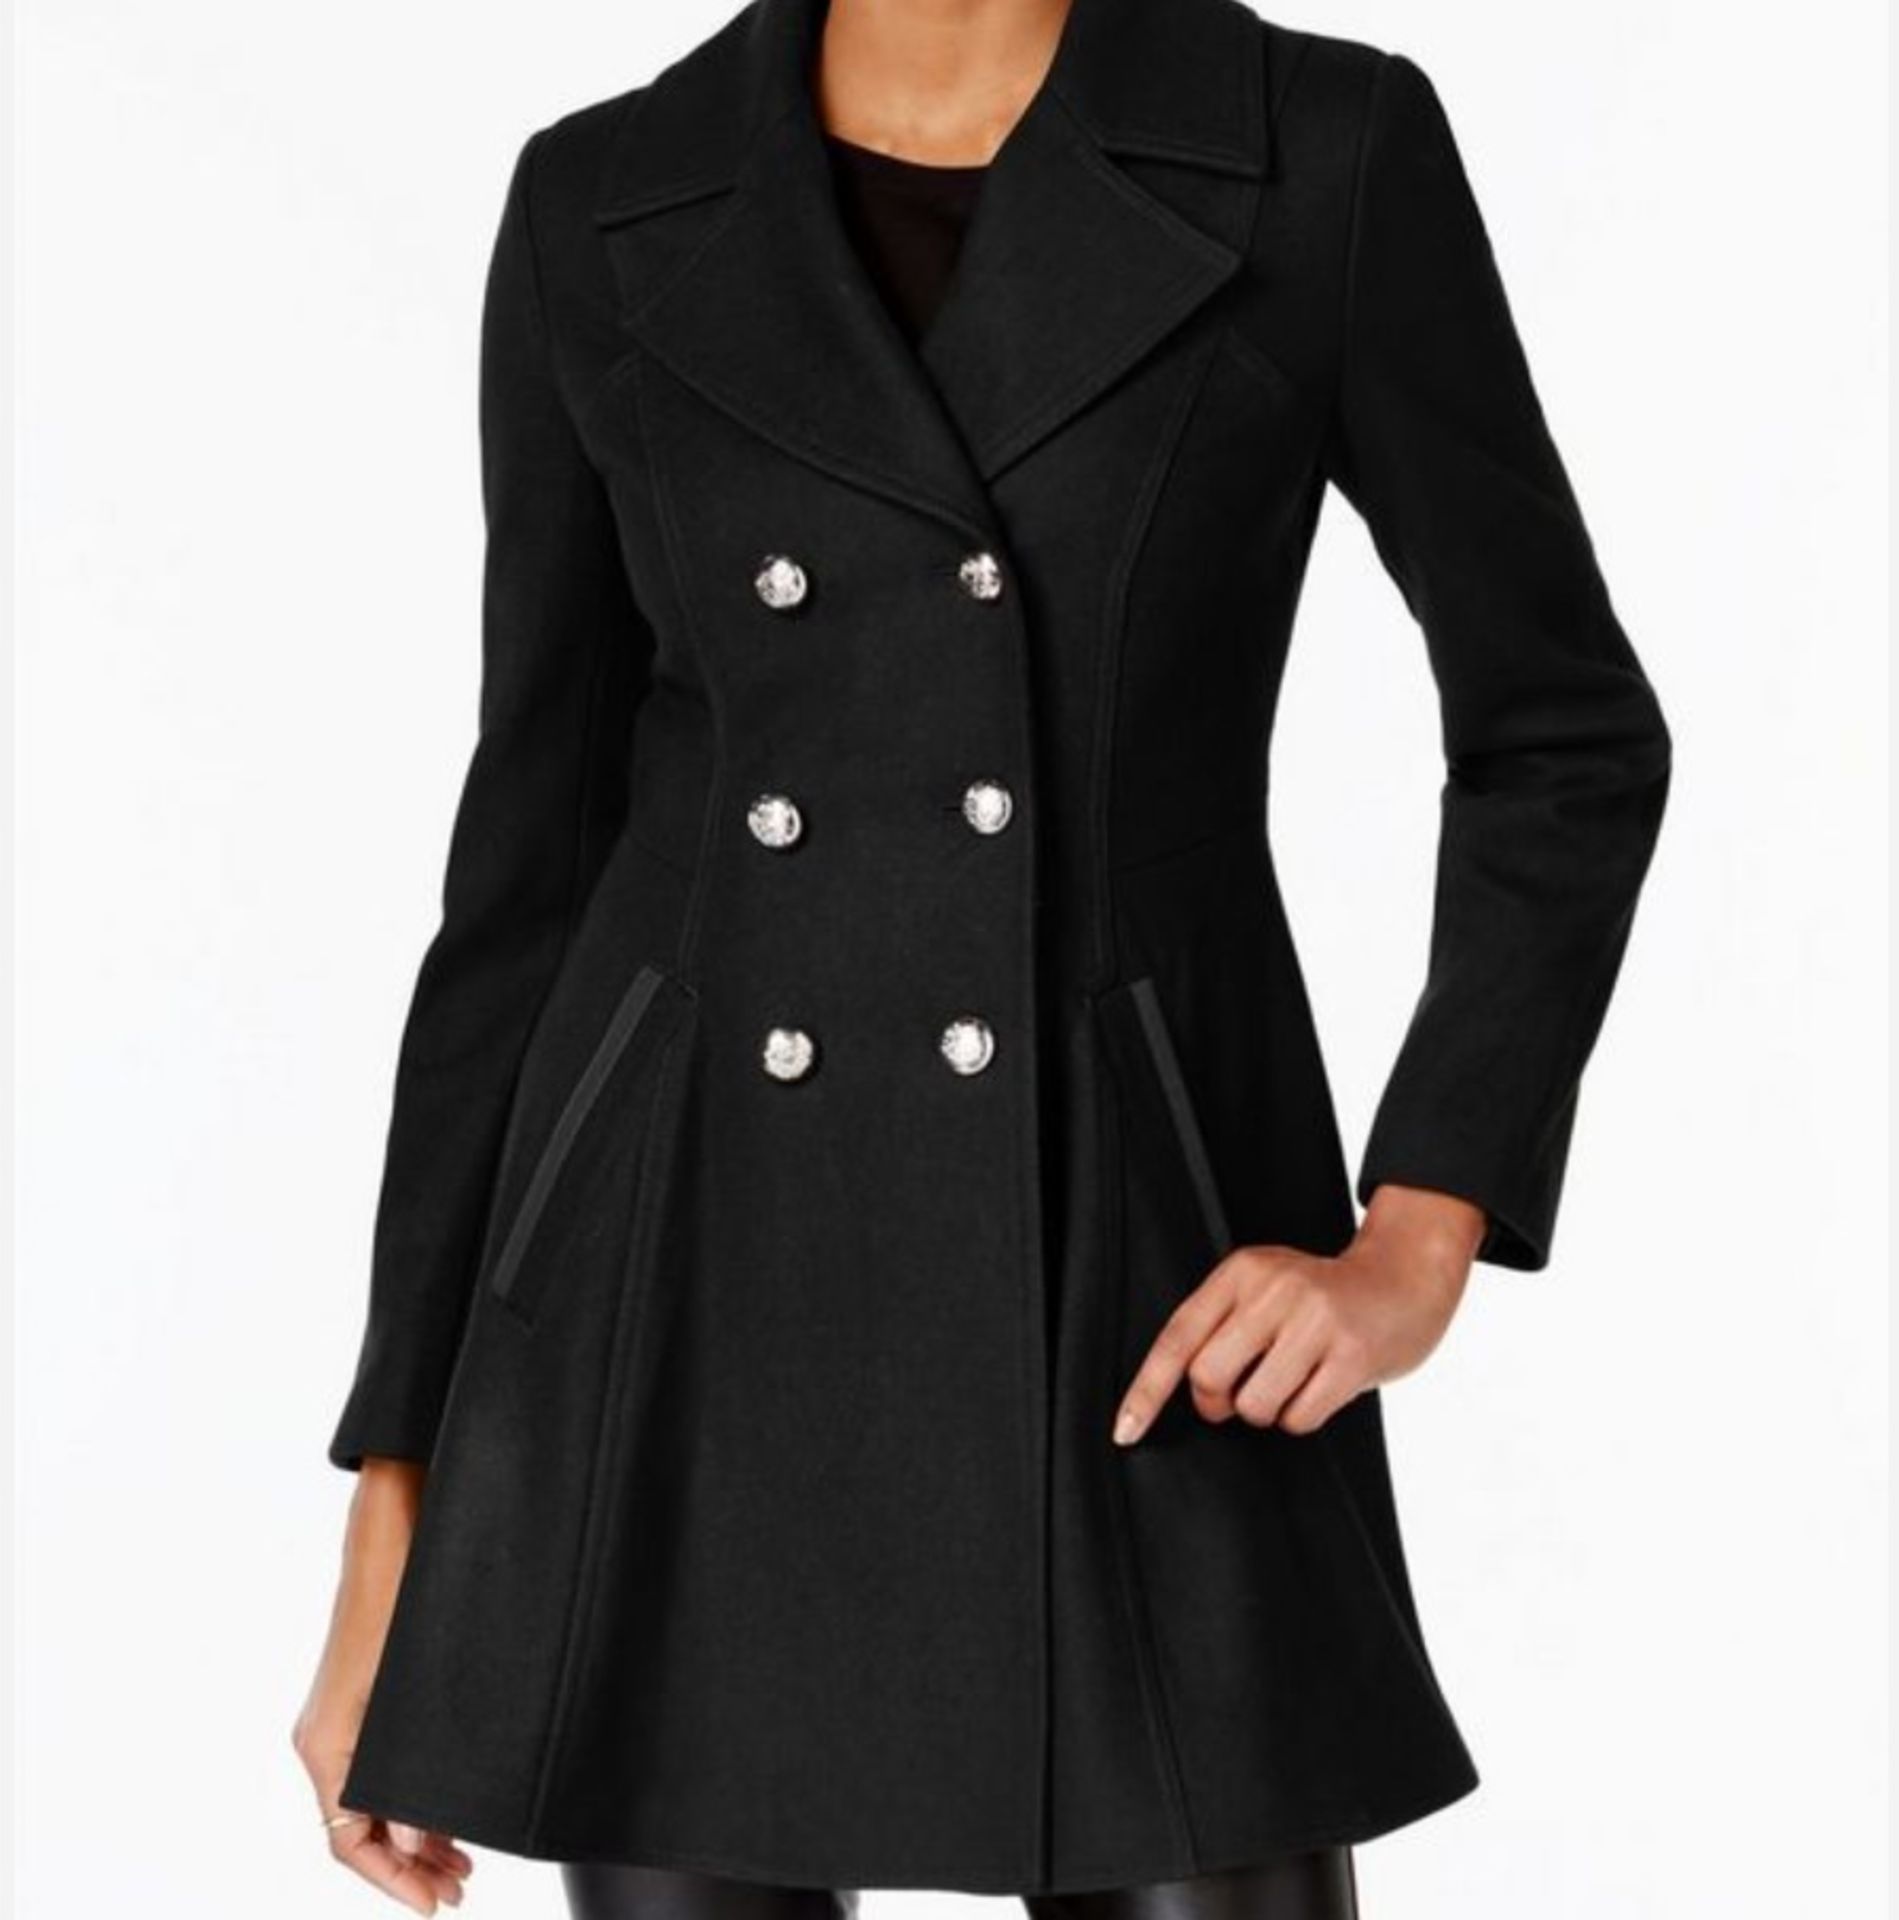 Laundry By Shelli Segal Petite Skirted Wool-Blend Peacoat Black Size M (RRP £108) - Image 3 of 3